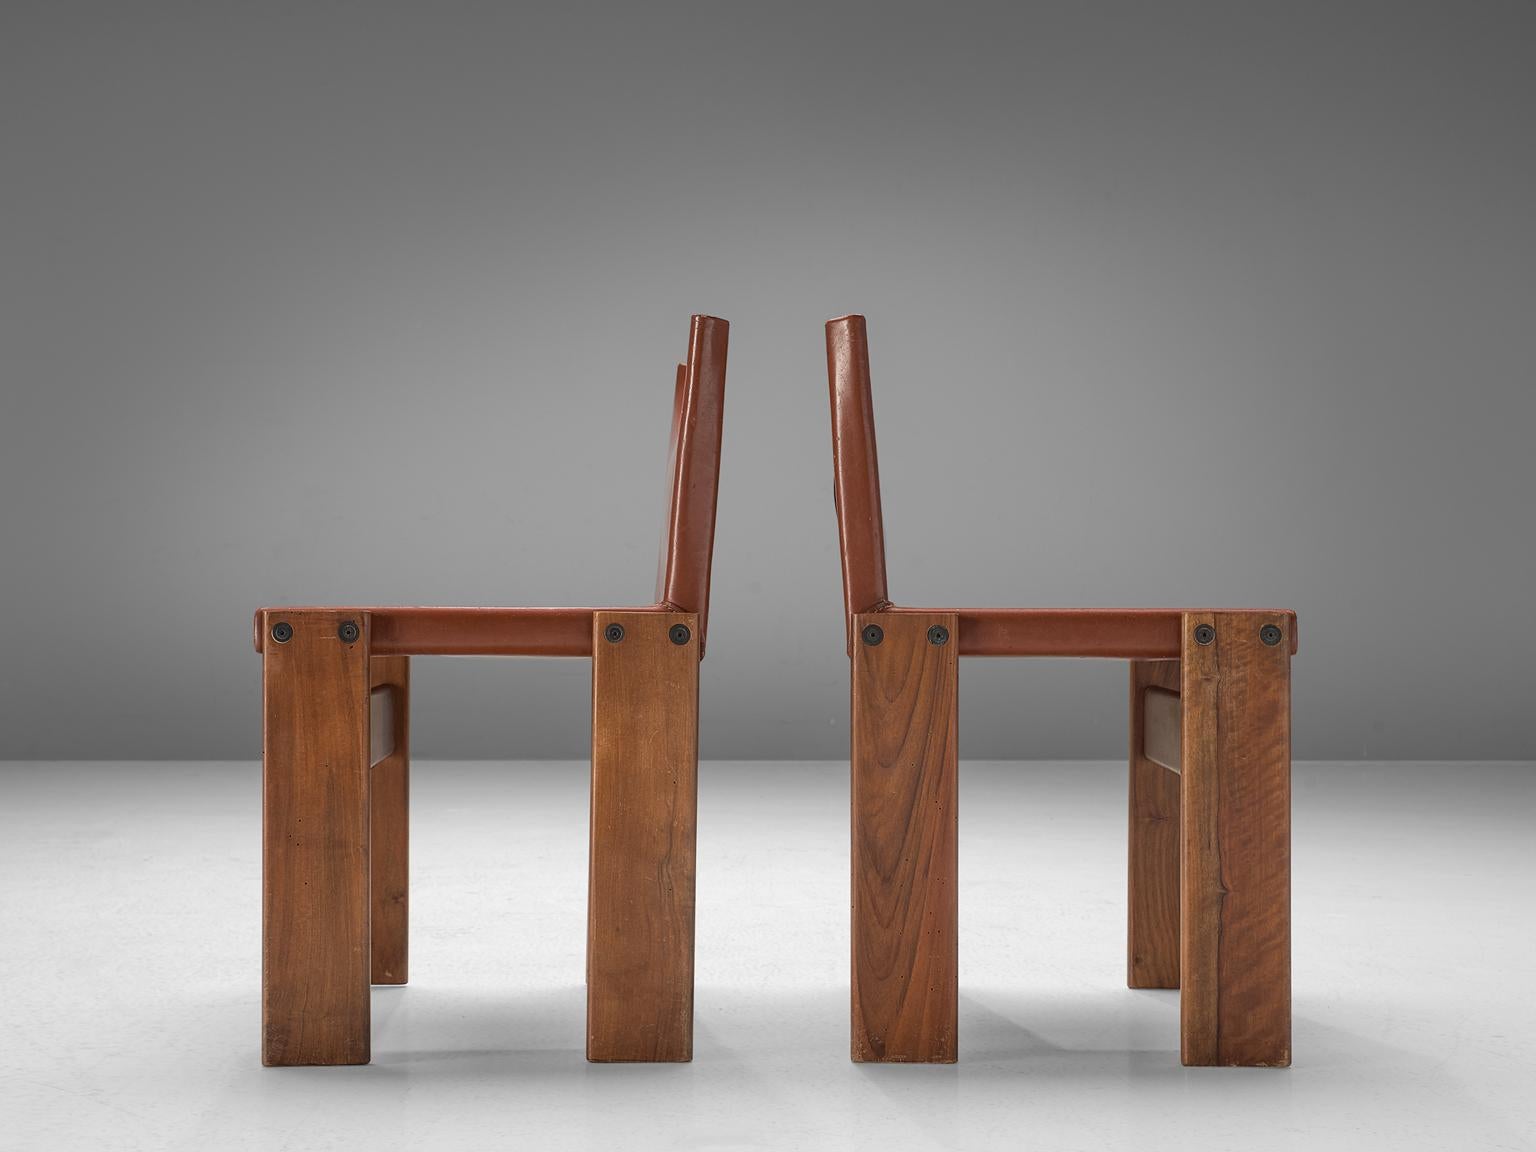 Italian Afra & Tobia Scarpa Set of Six Monk Chairs in Terracotta Red Leather